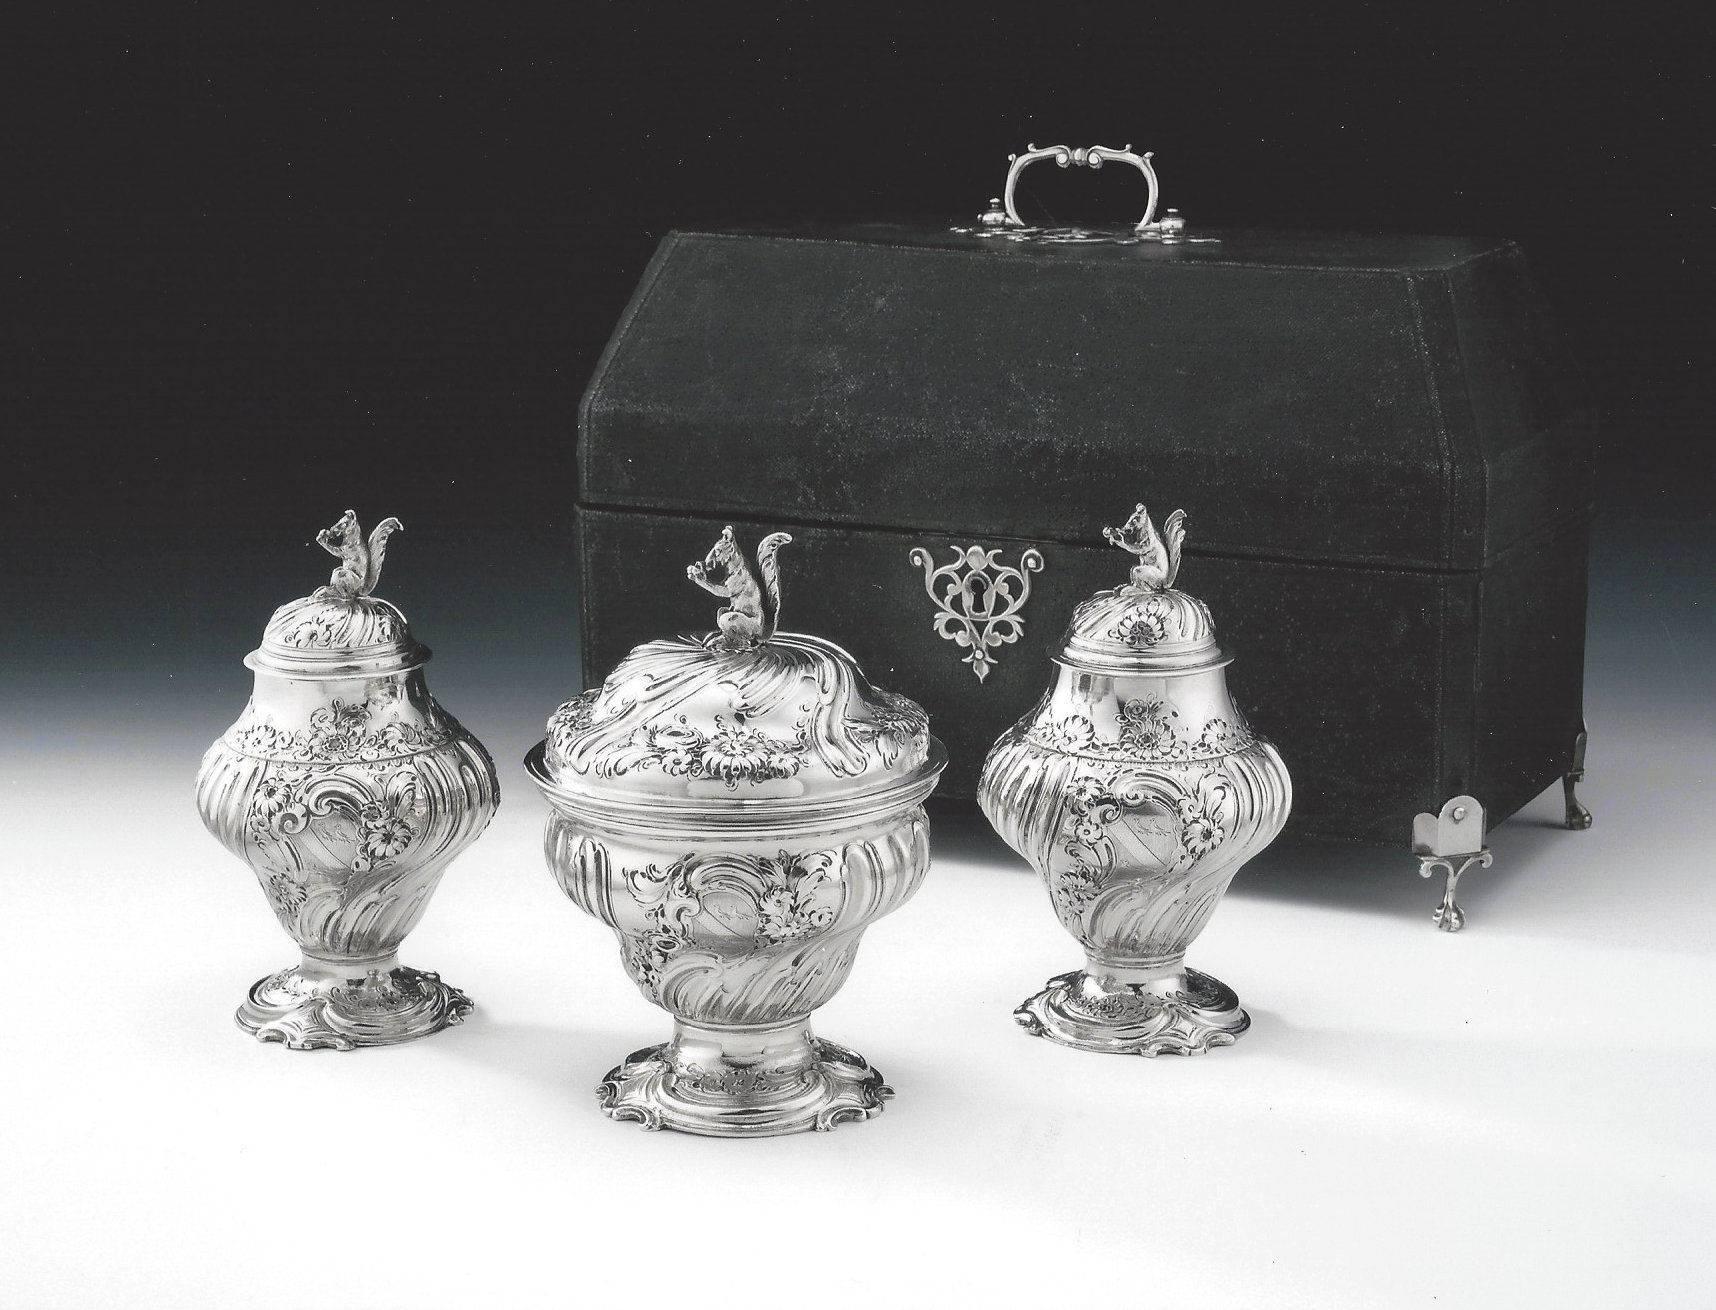 The tea caddies and sugar bowl stand on a cast shaped foot chased with Rococo scrolls and flower heads. The baluster shaped main bodies are decorated with spiral fluting, as well as floral sprays. The pull off covers are decorated in the same manner